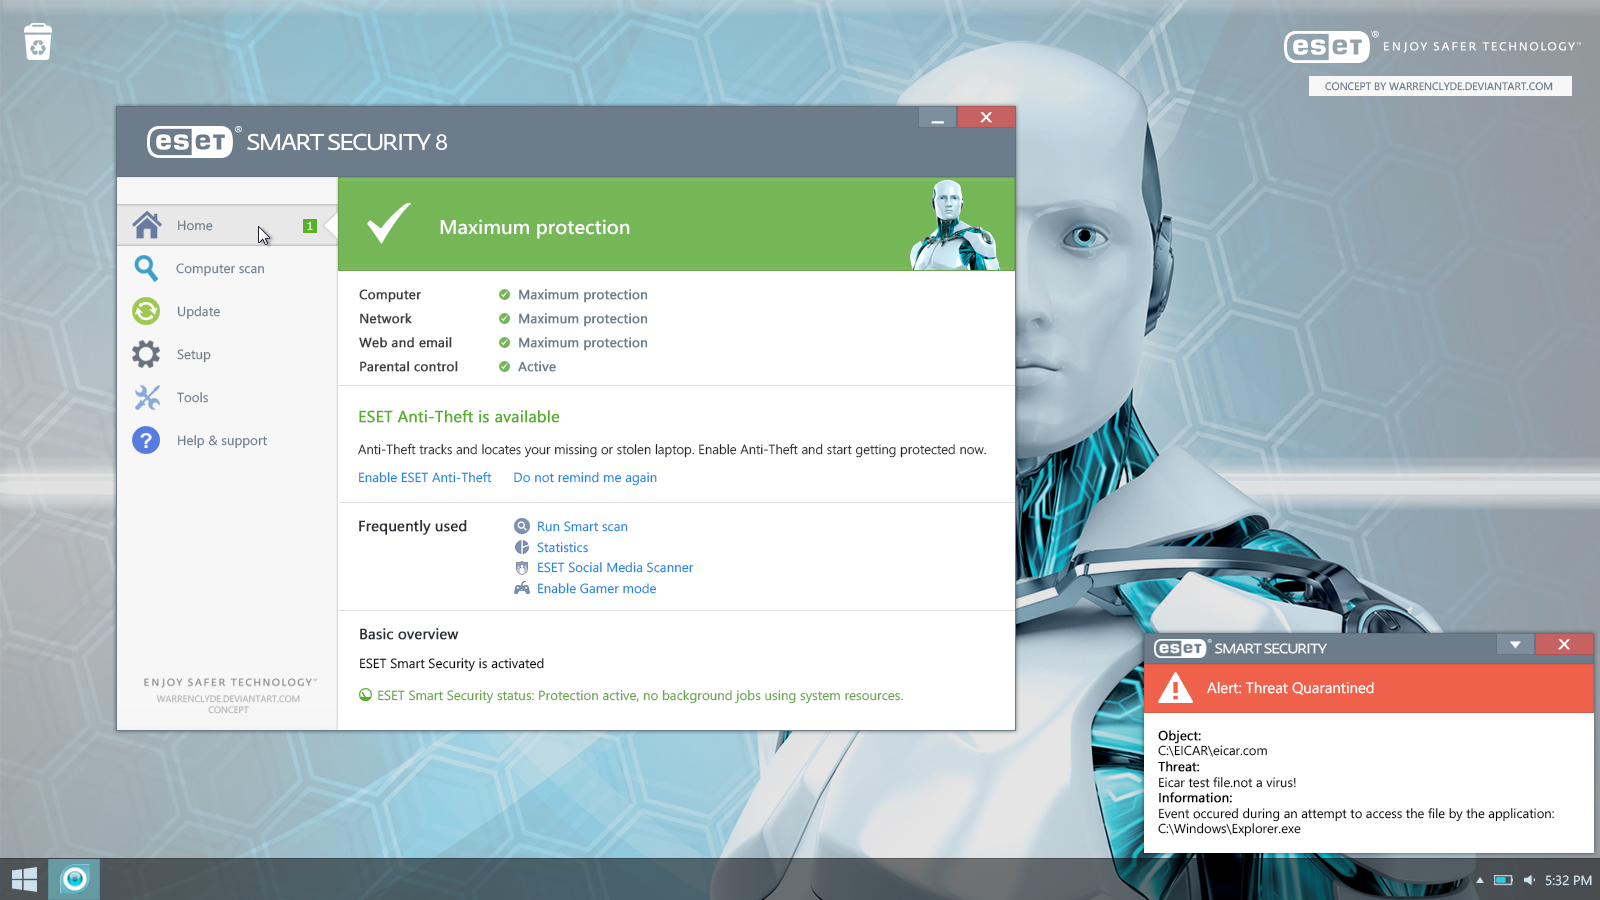 consumer gray Airlines ESET Smart Security 8 UI Concept by WarrenClyde on DeviantArt